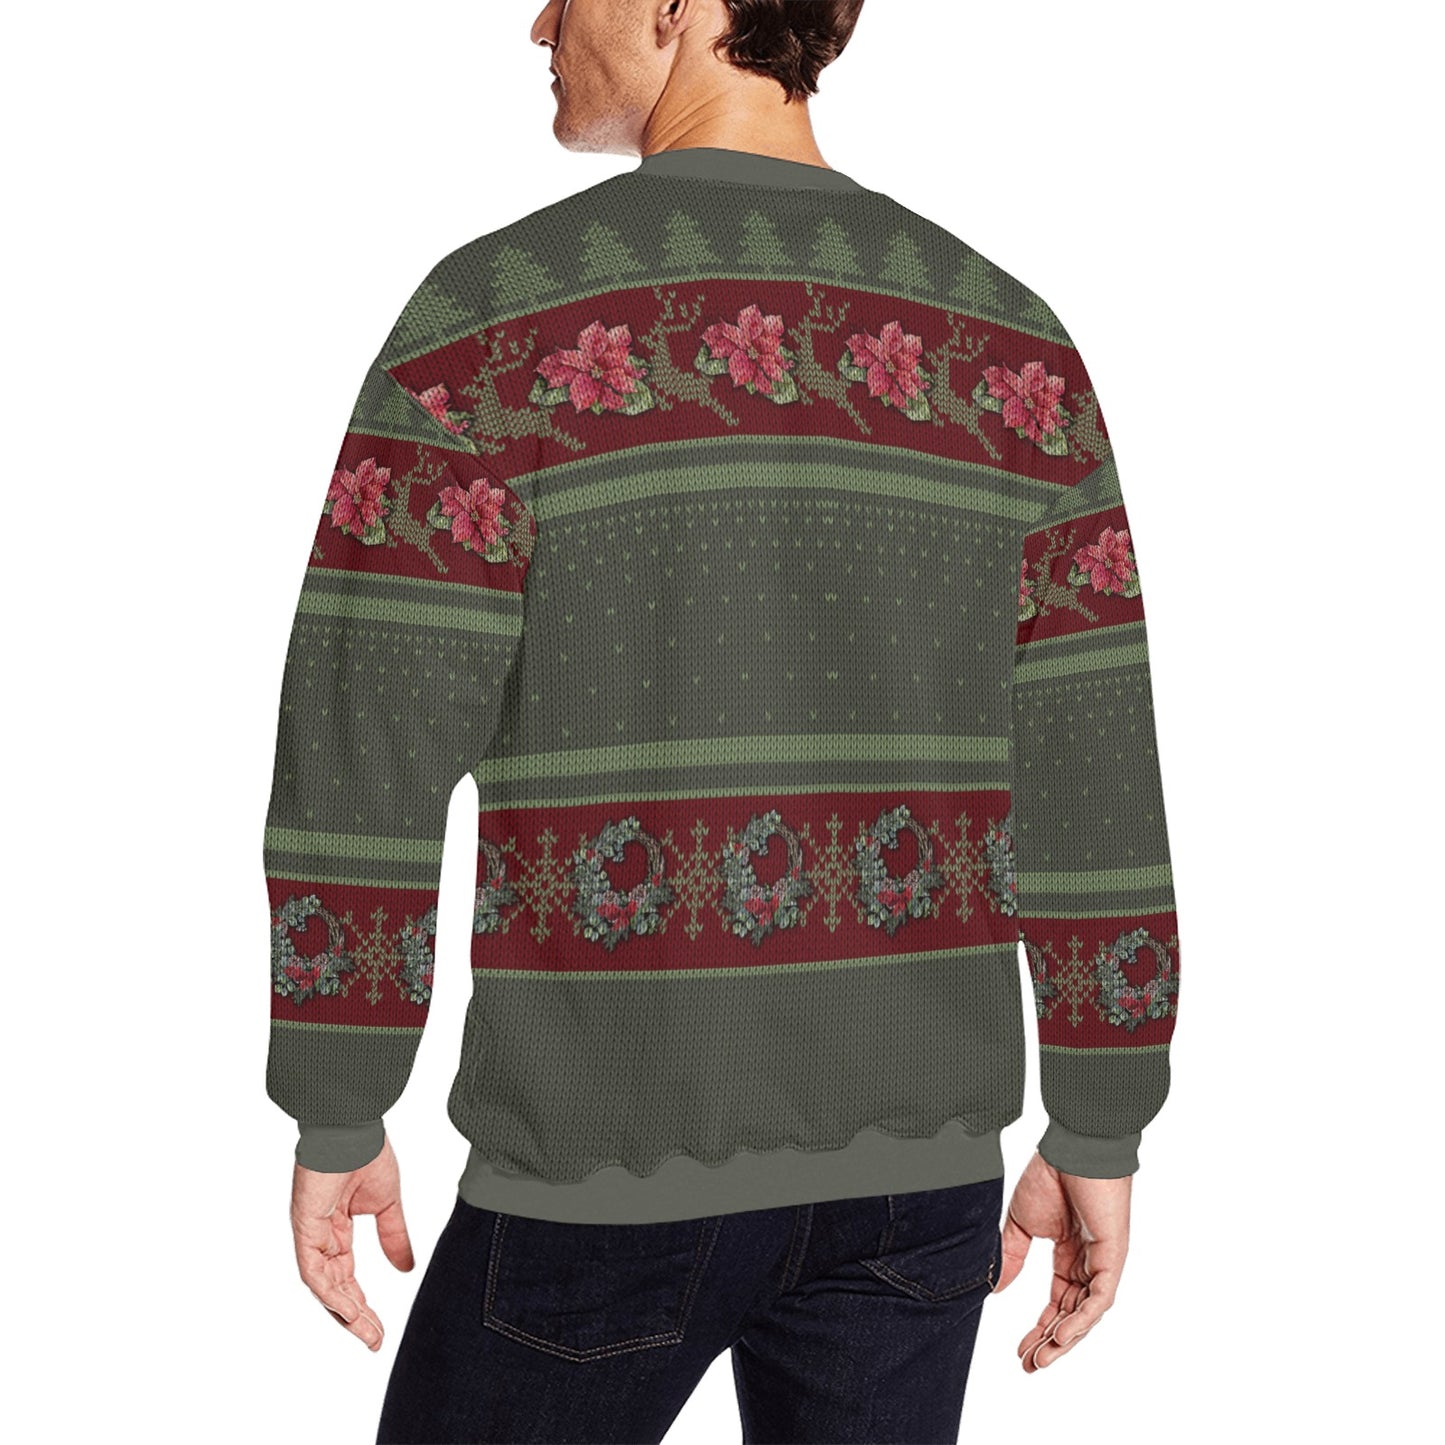 Have A Holly Dolly Christmas All Over Print Crewneck Sweatshirt